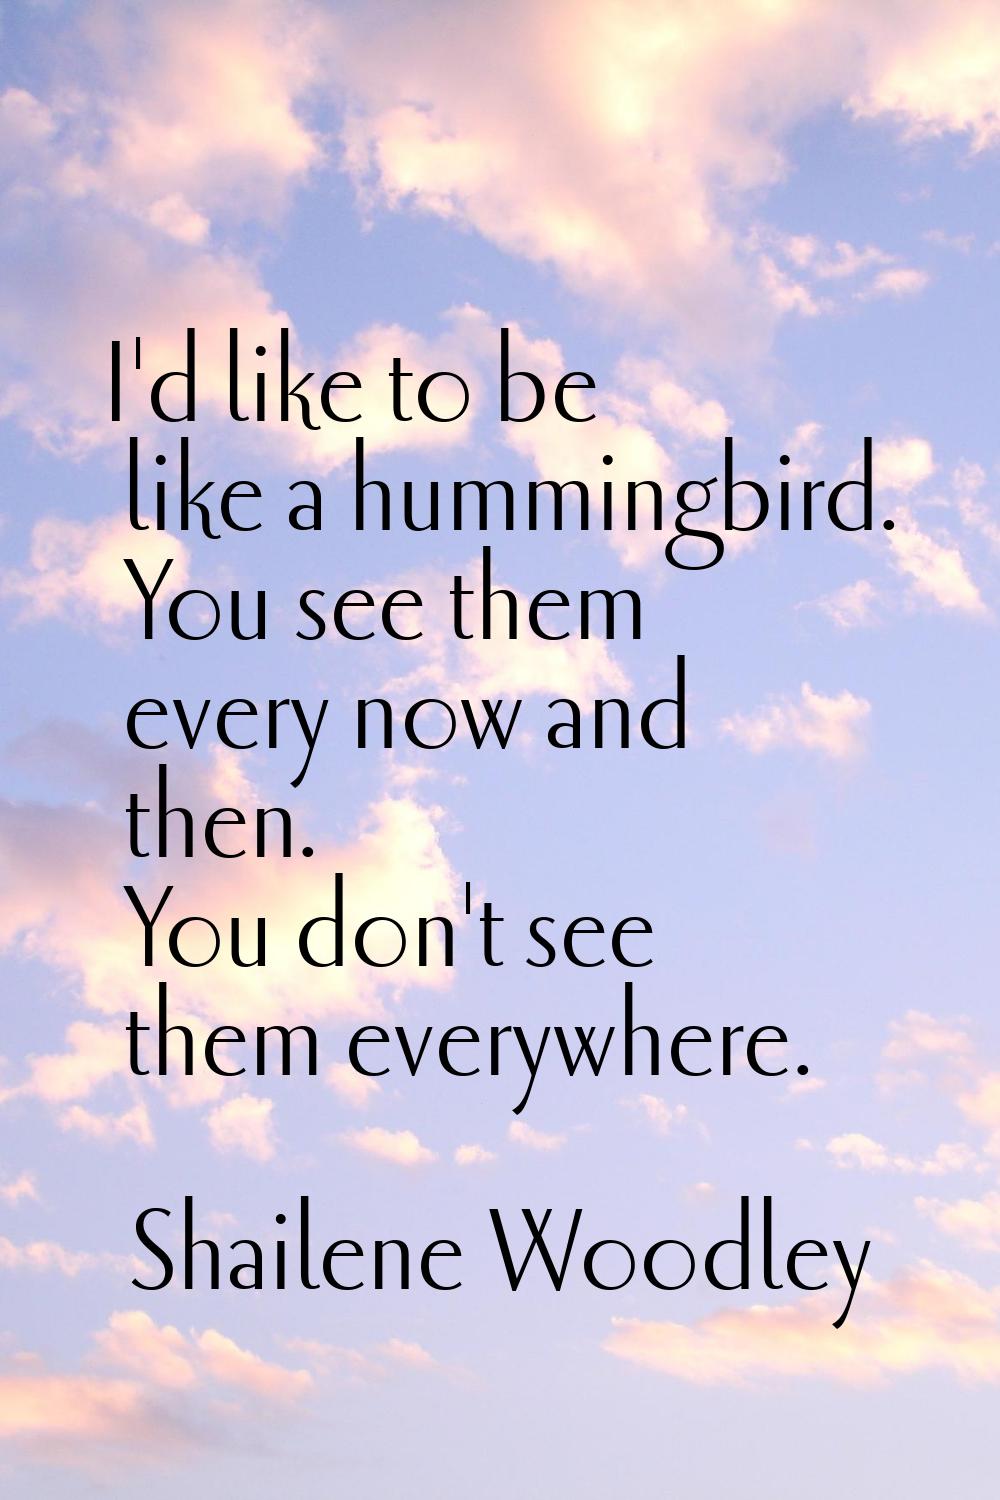 I'd like to be like a hummingbird. You see them every now and then. You don't see them everywhere.